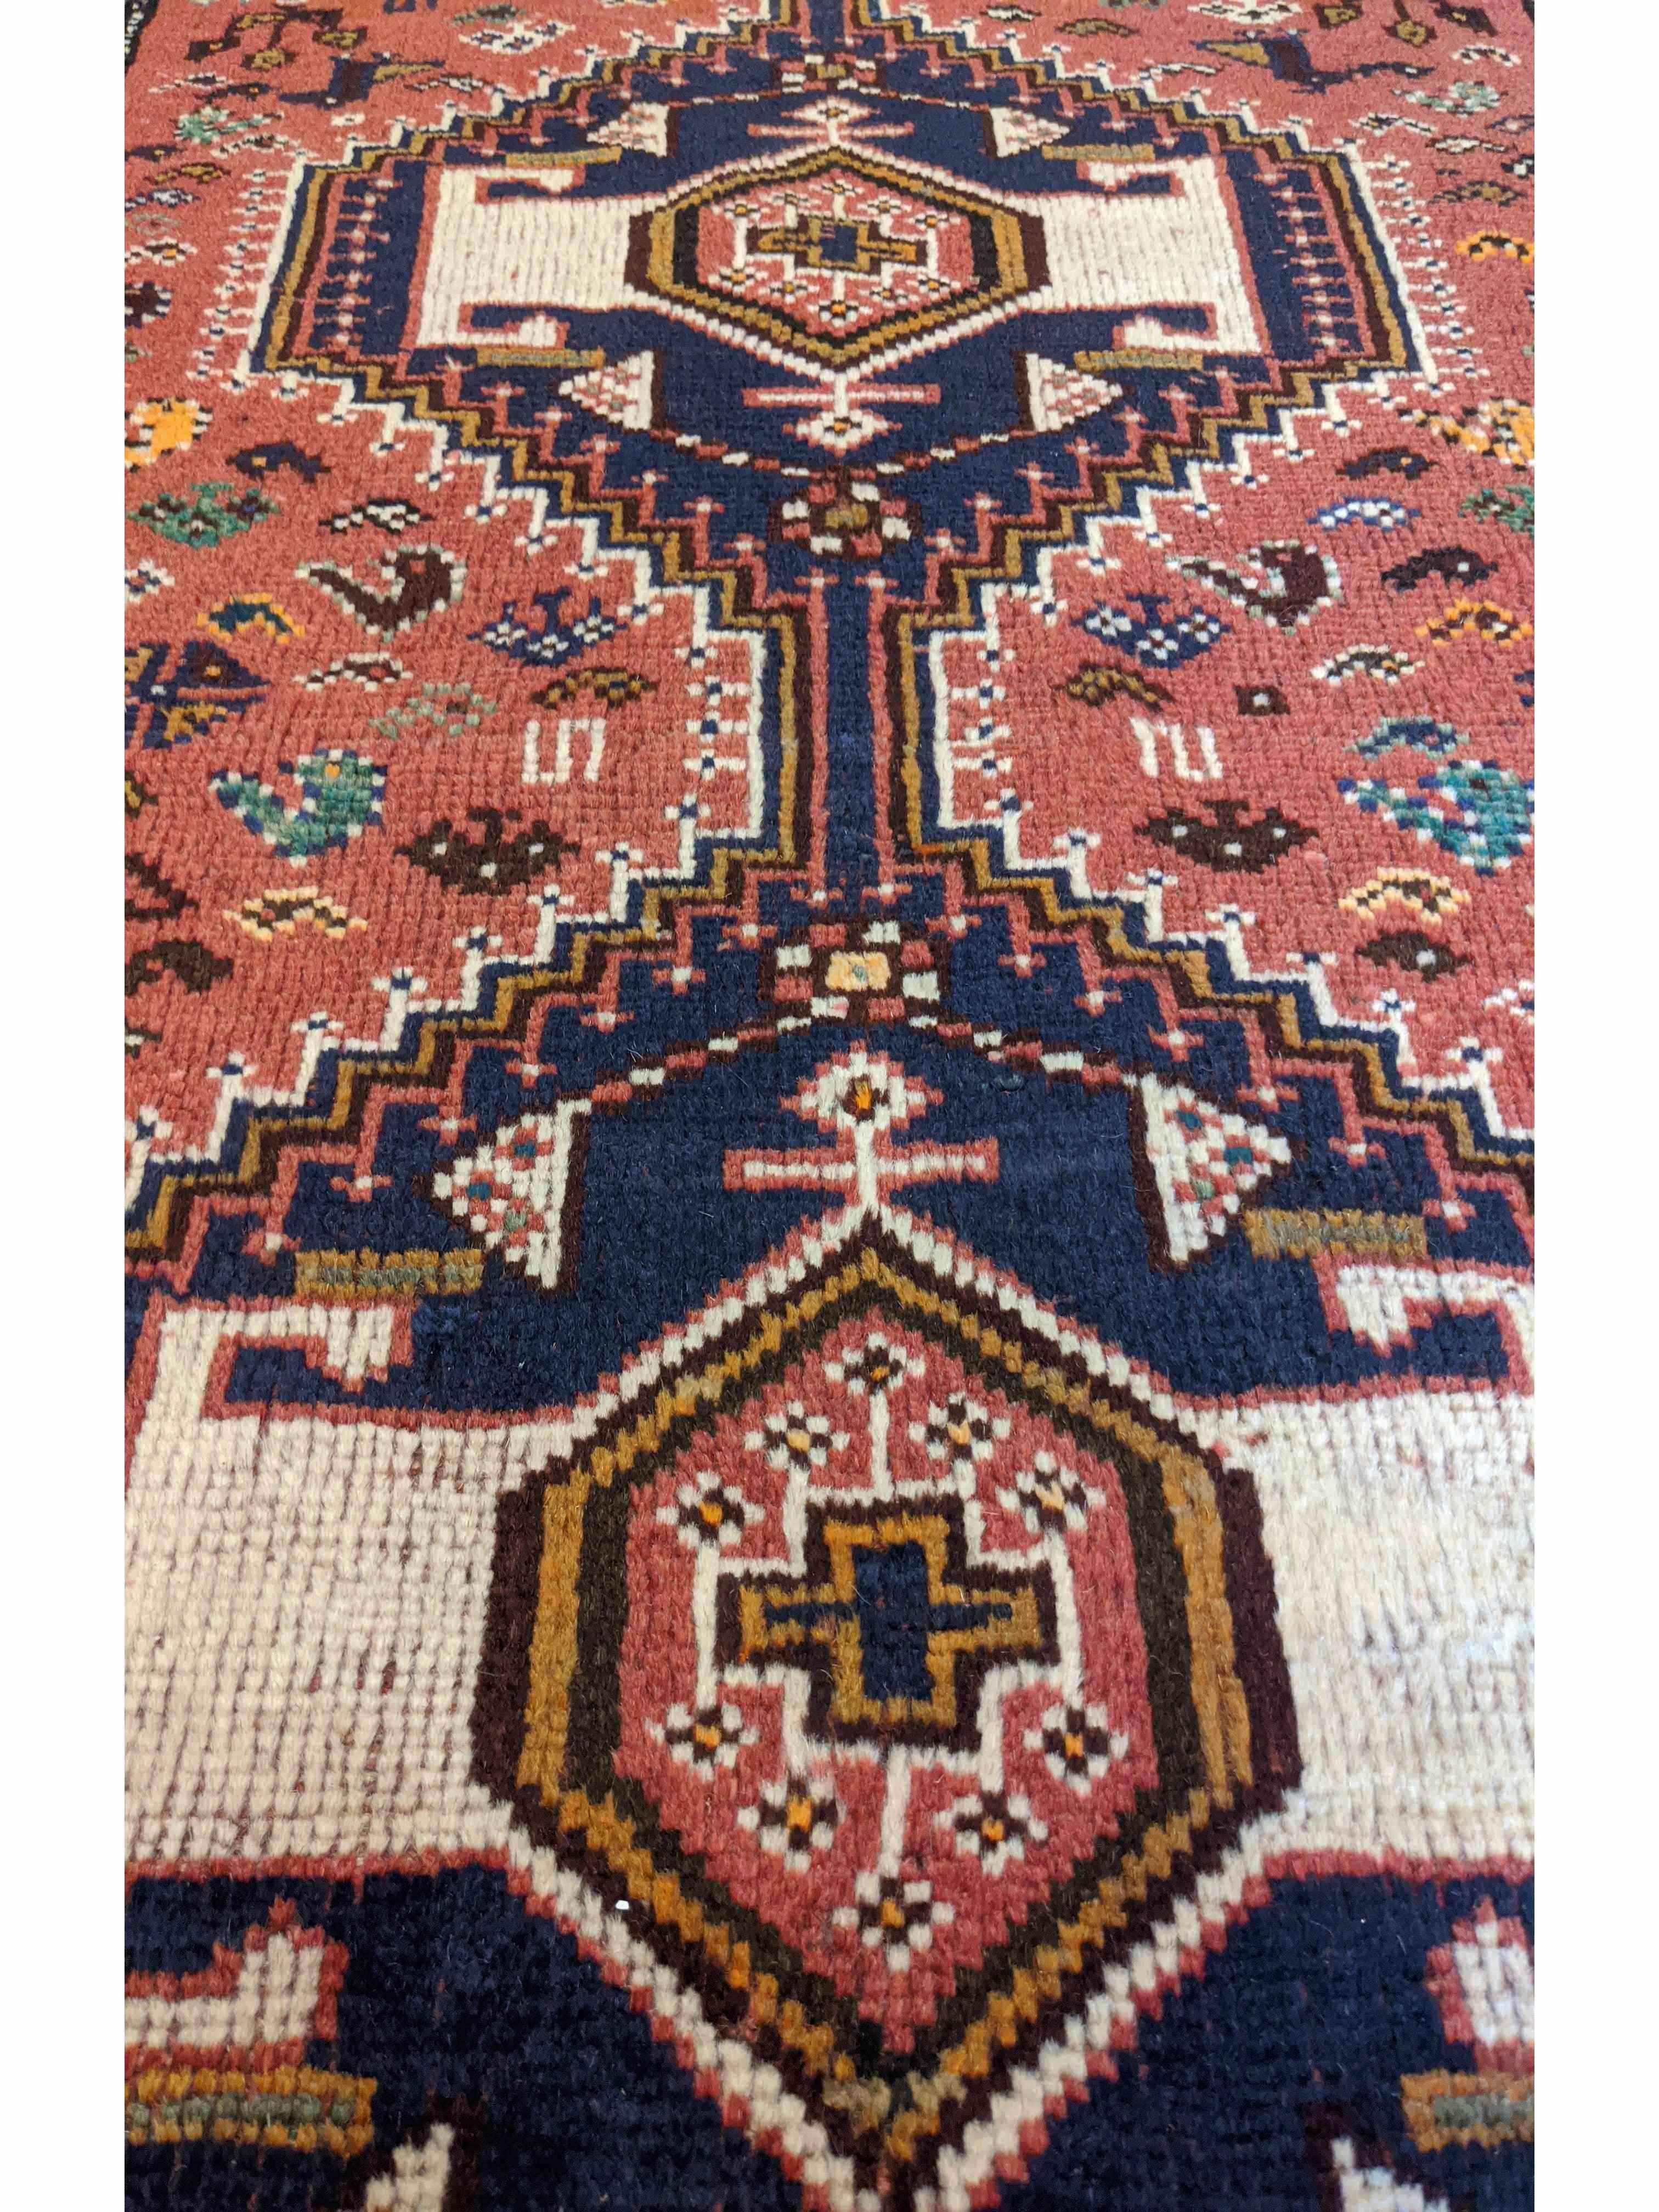 140 x 100 cm Shiraz Traditional Red Rug - Rugmaster